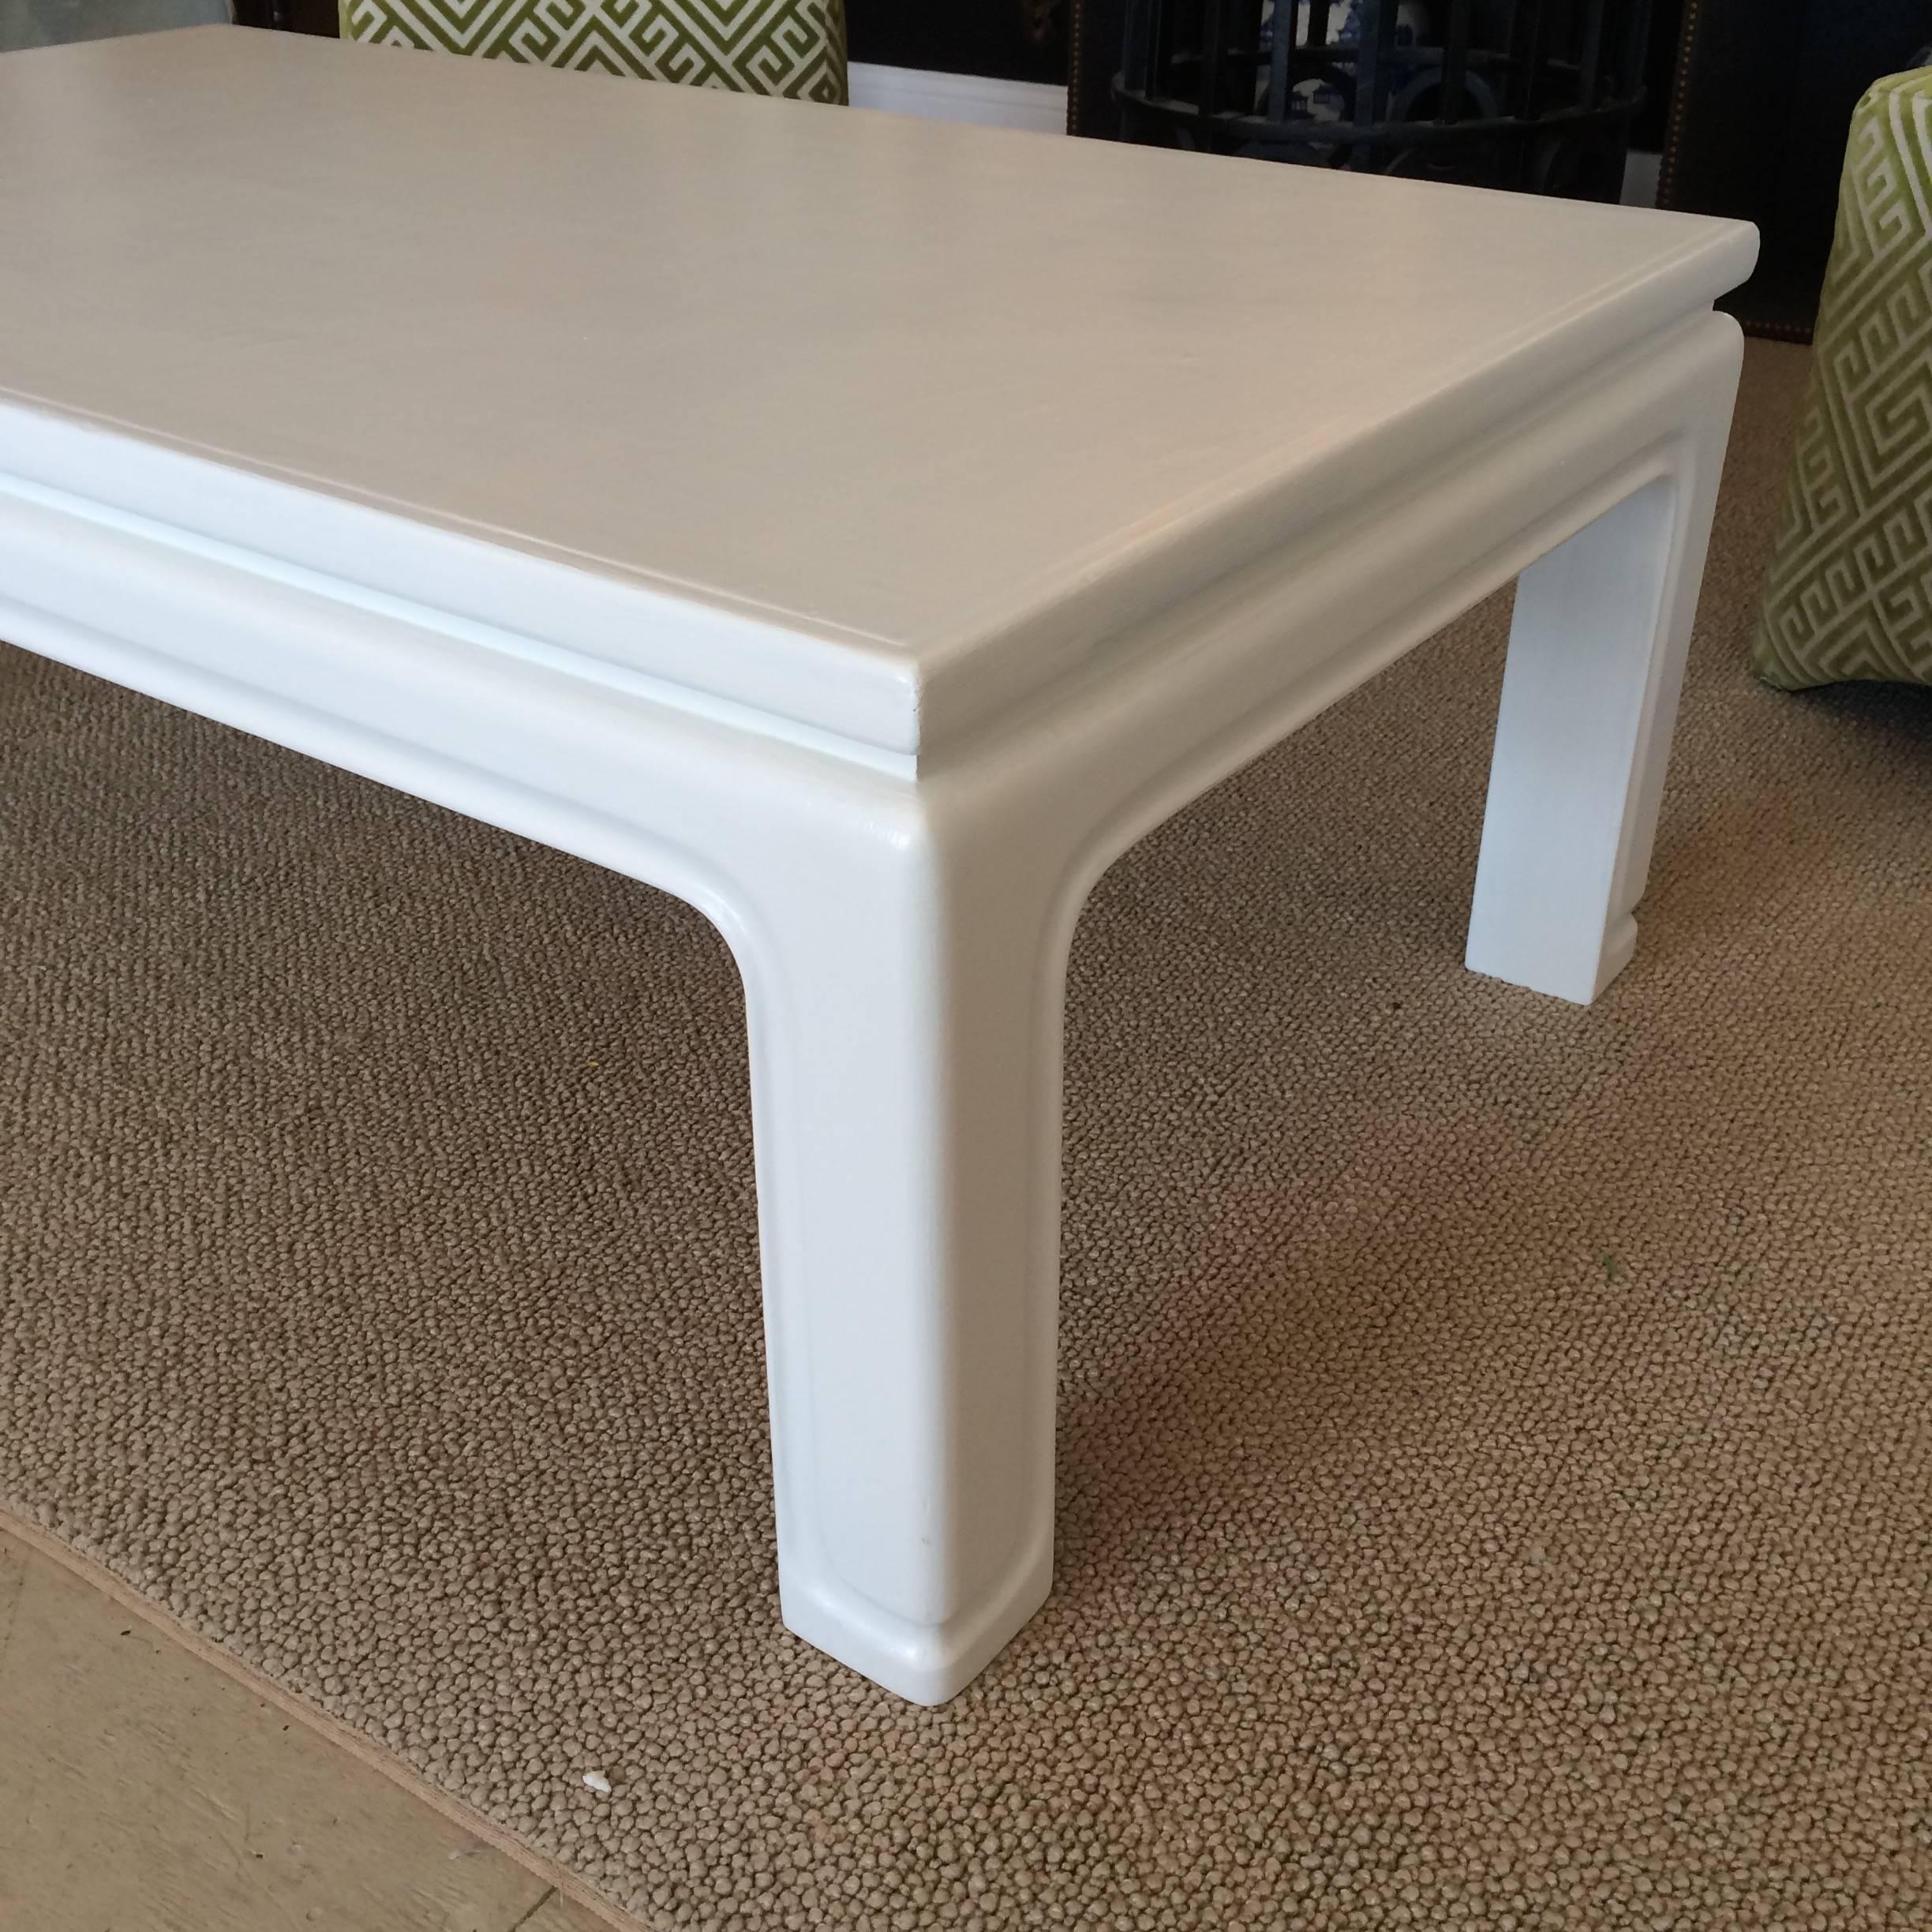 Sophisticated coffee table in the style of Karl Springer; painted and textured wood in white, USA, 1970s, excellent condition.